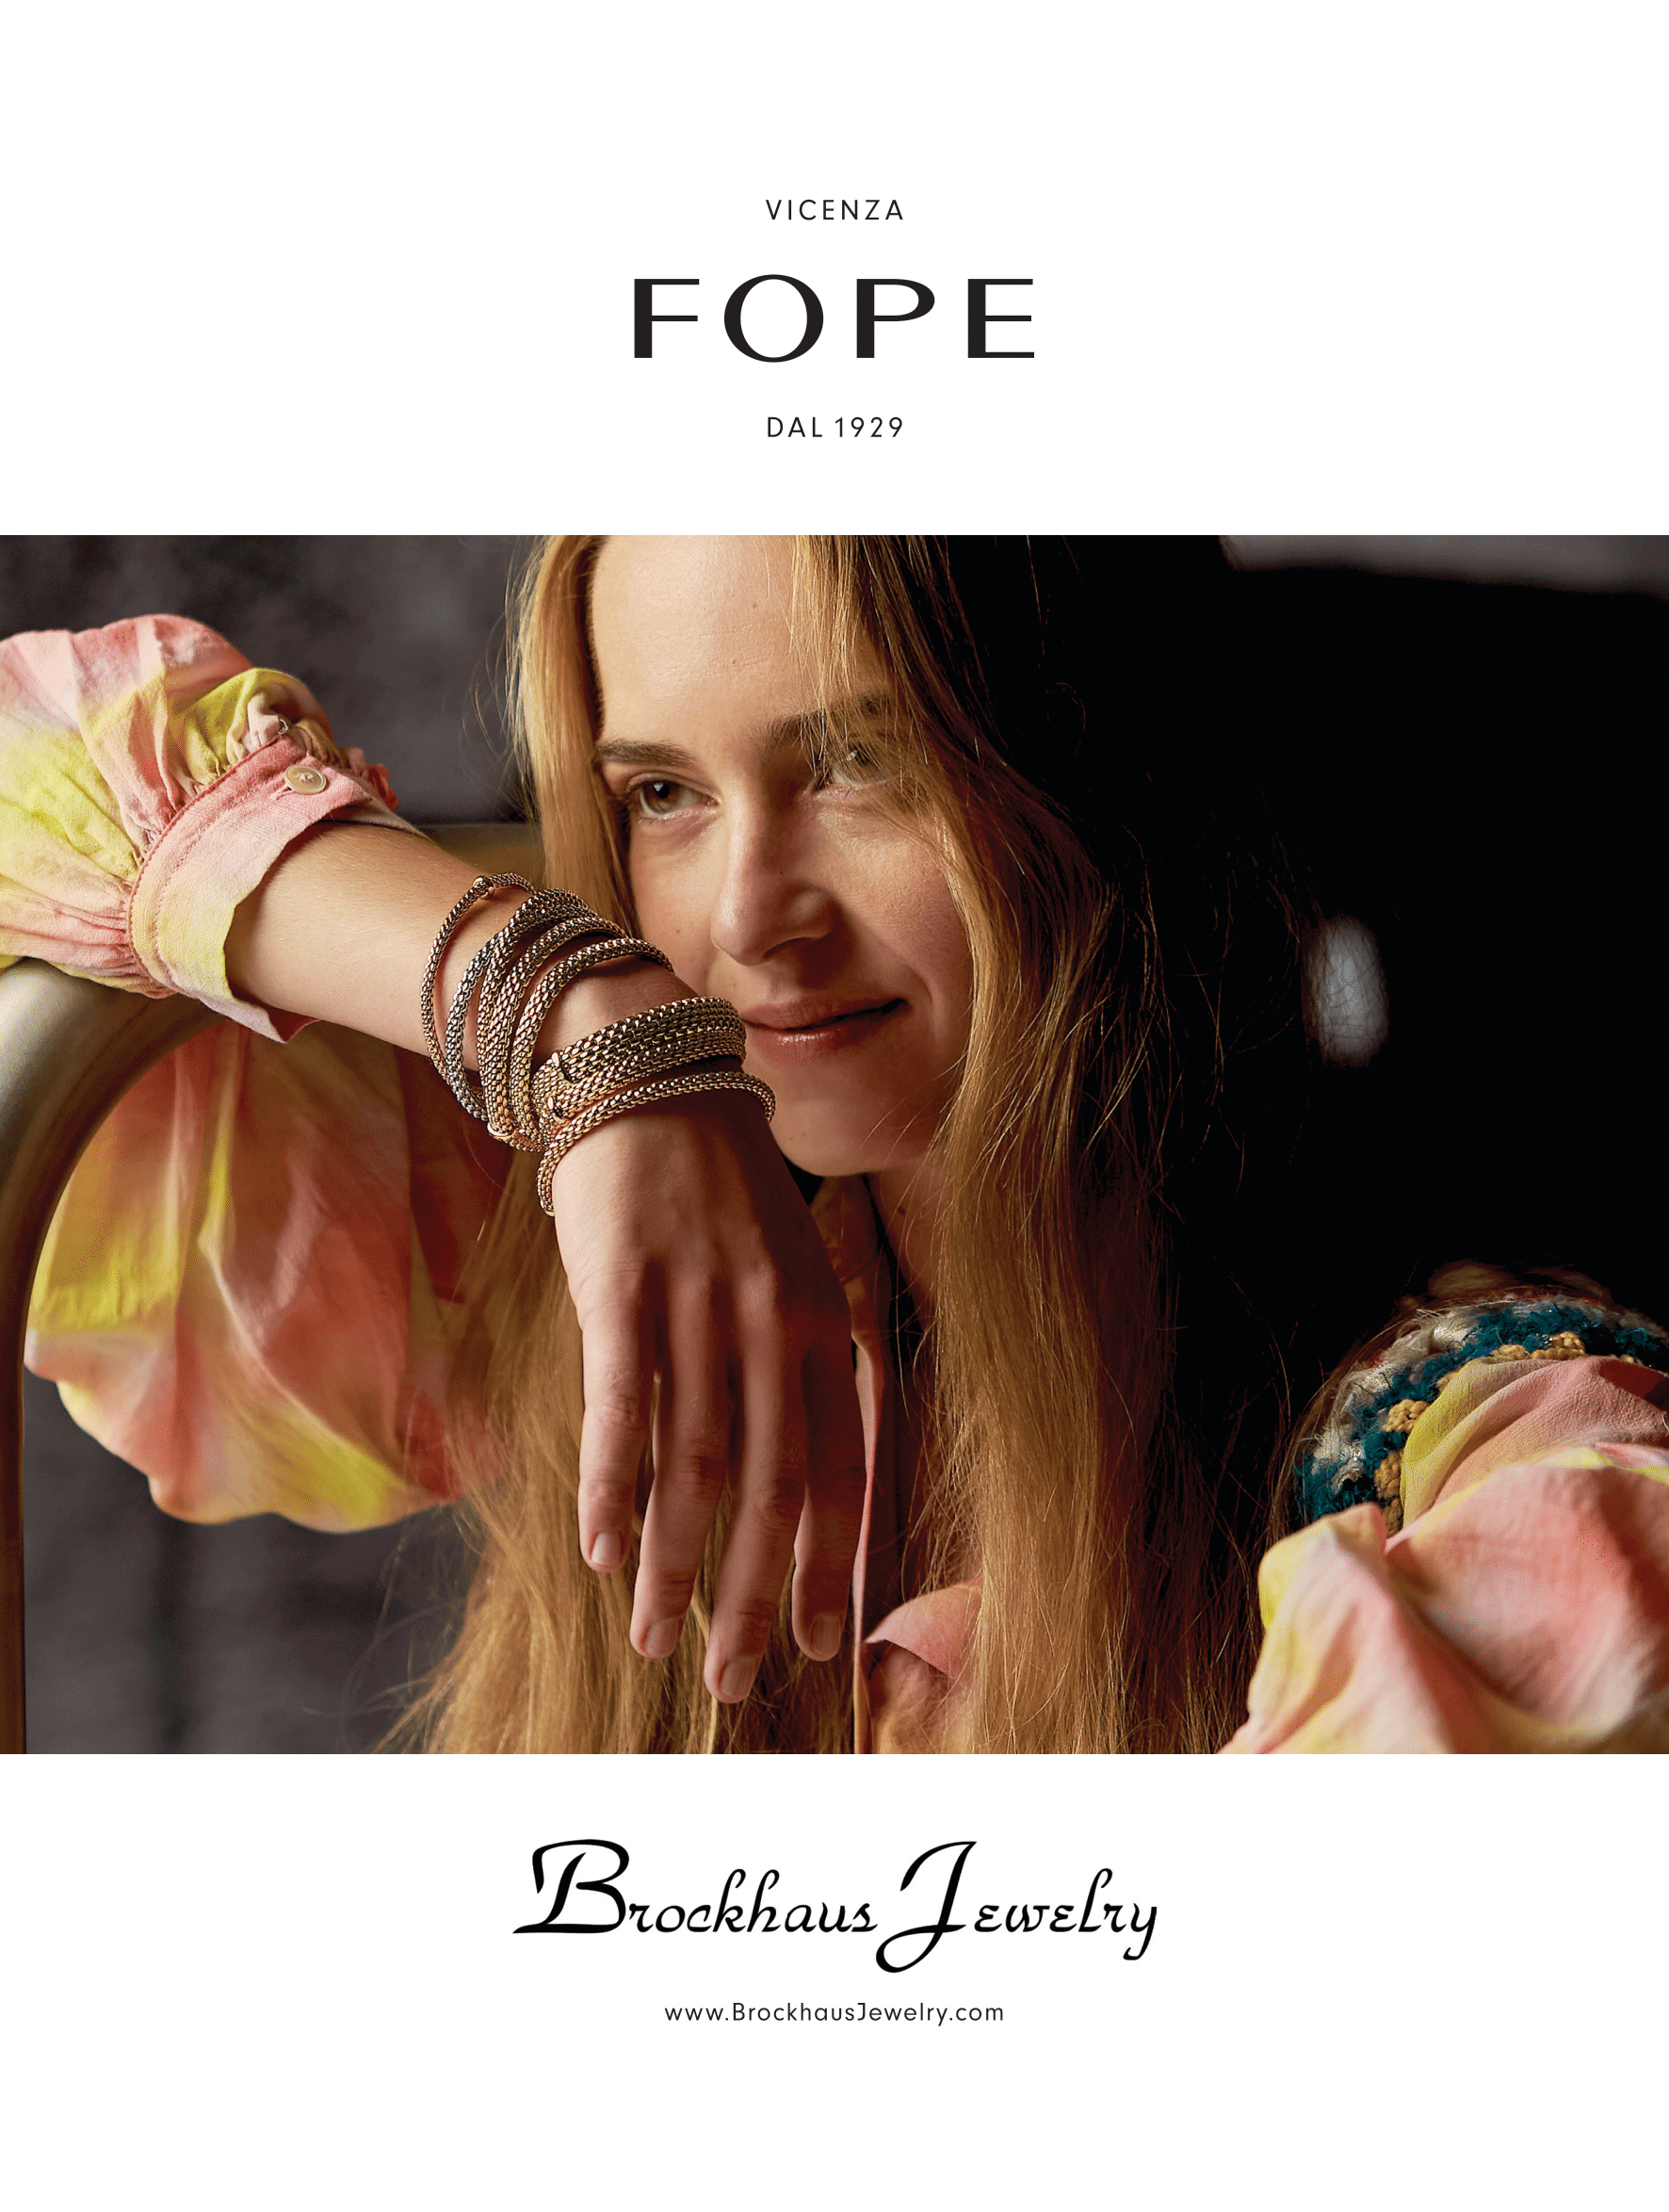 Brockhaus Jewelry ad in Vogue US featuring FOPE